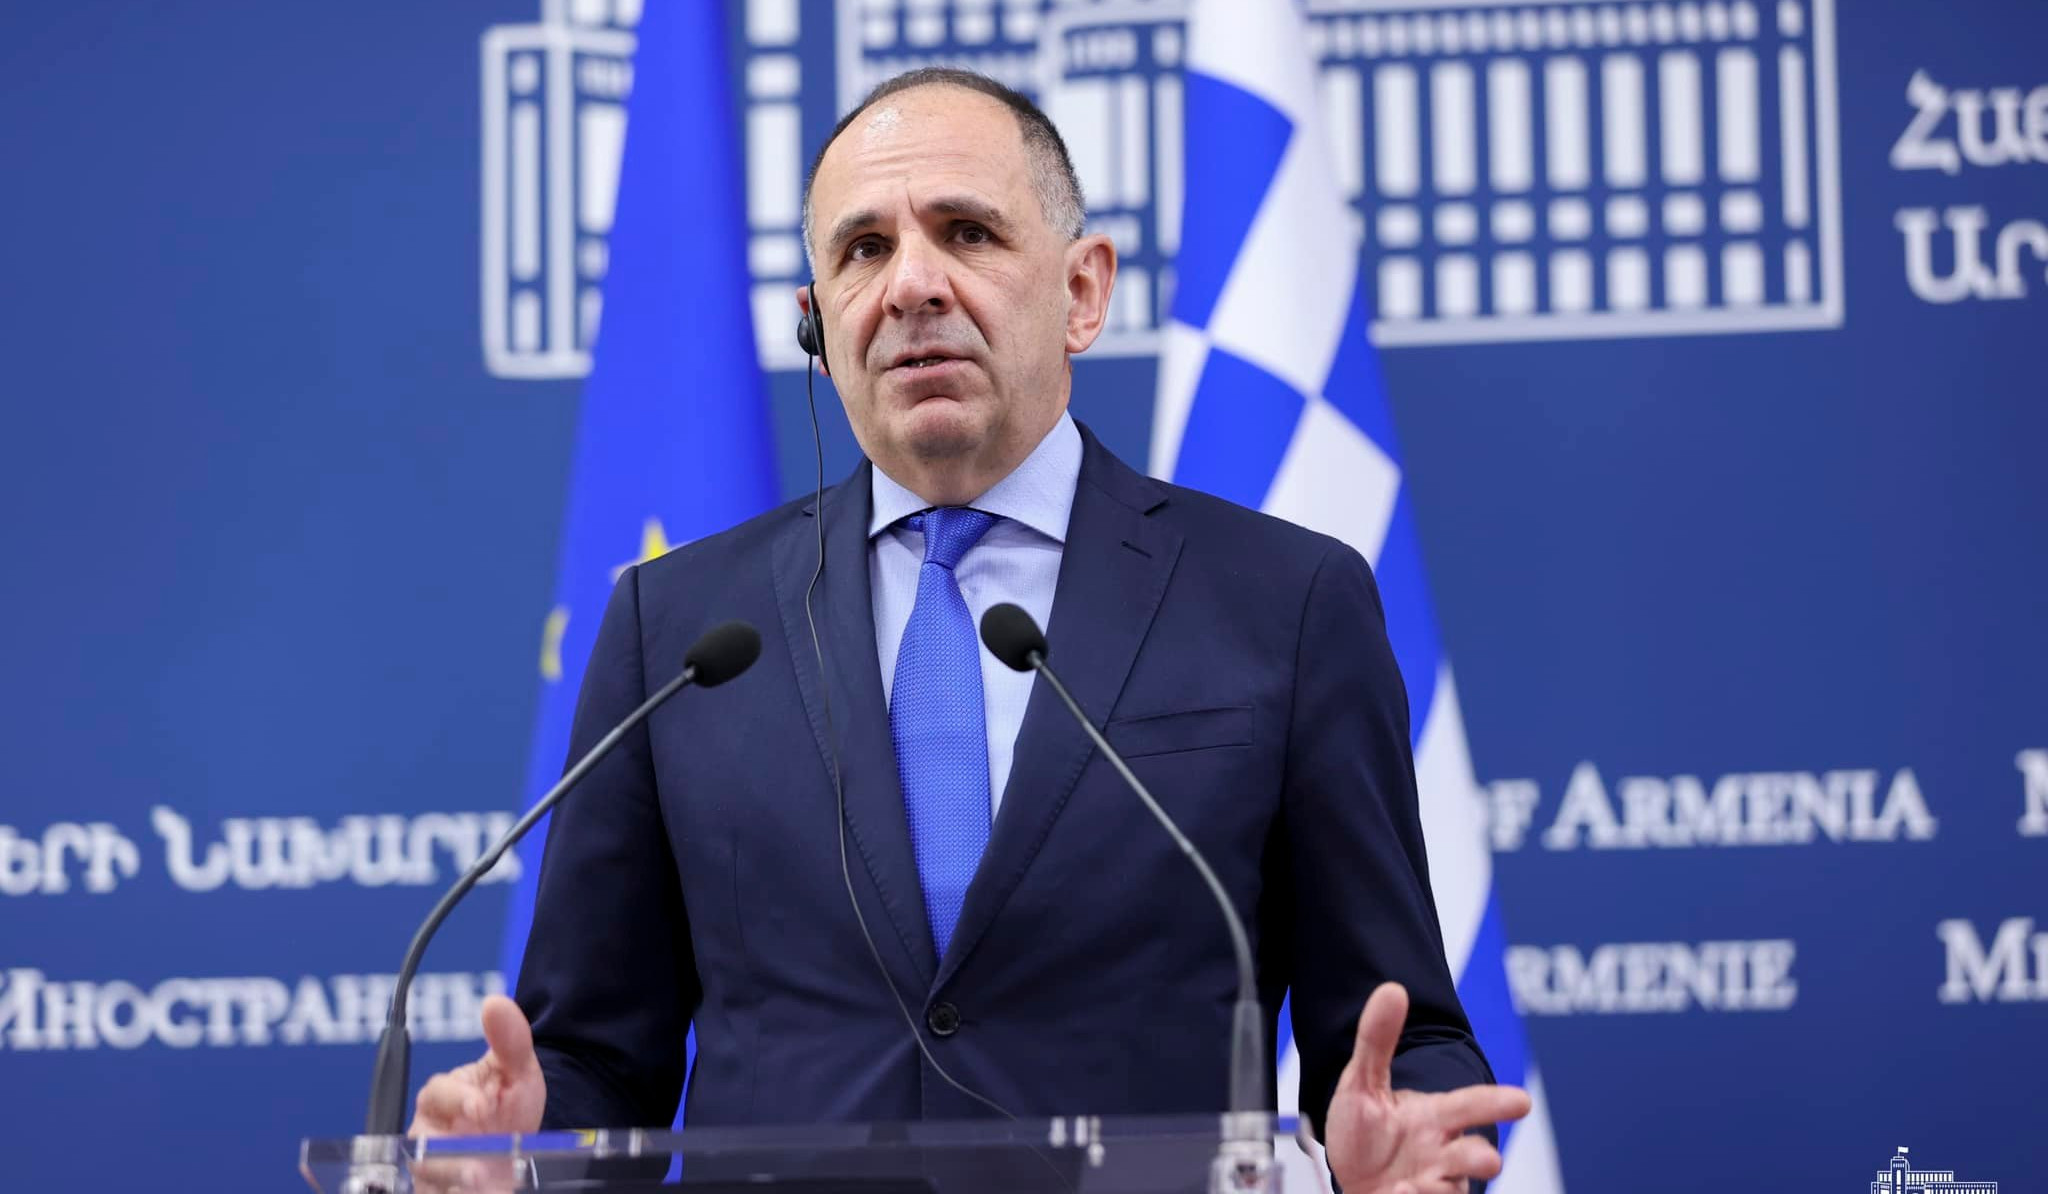 It is important to help our friendly and ally country on all international platforms: statement of Greek Foreign Minister after visit to Armenia